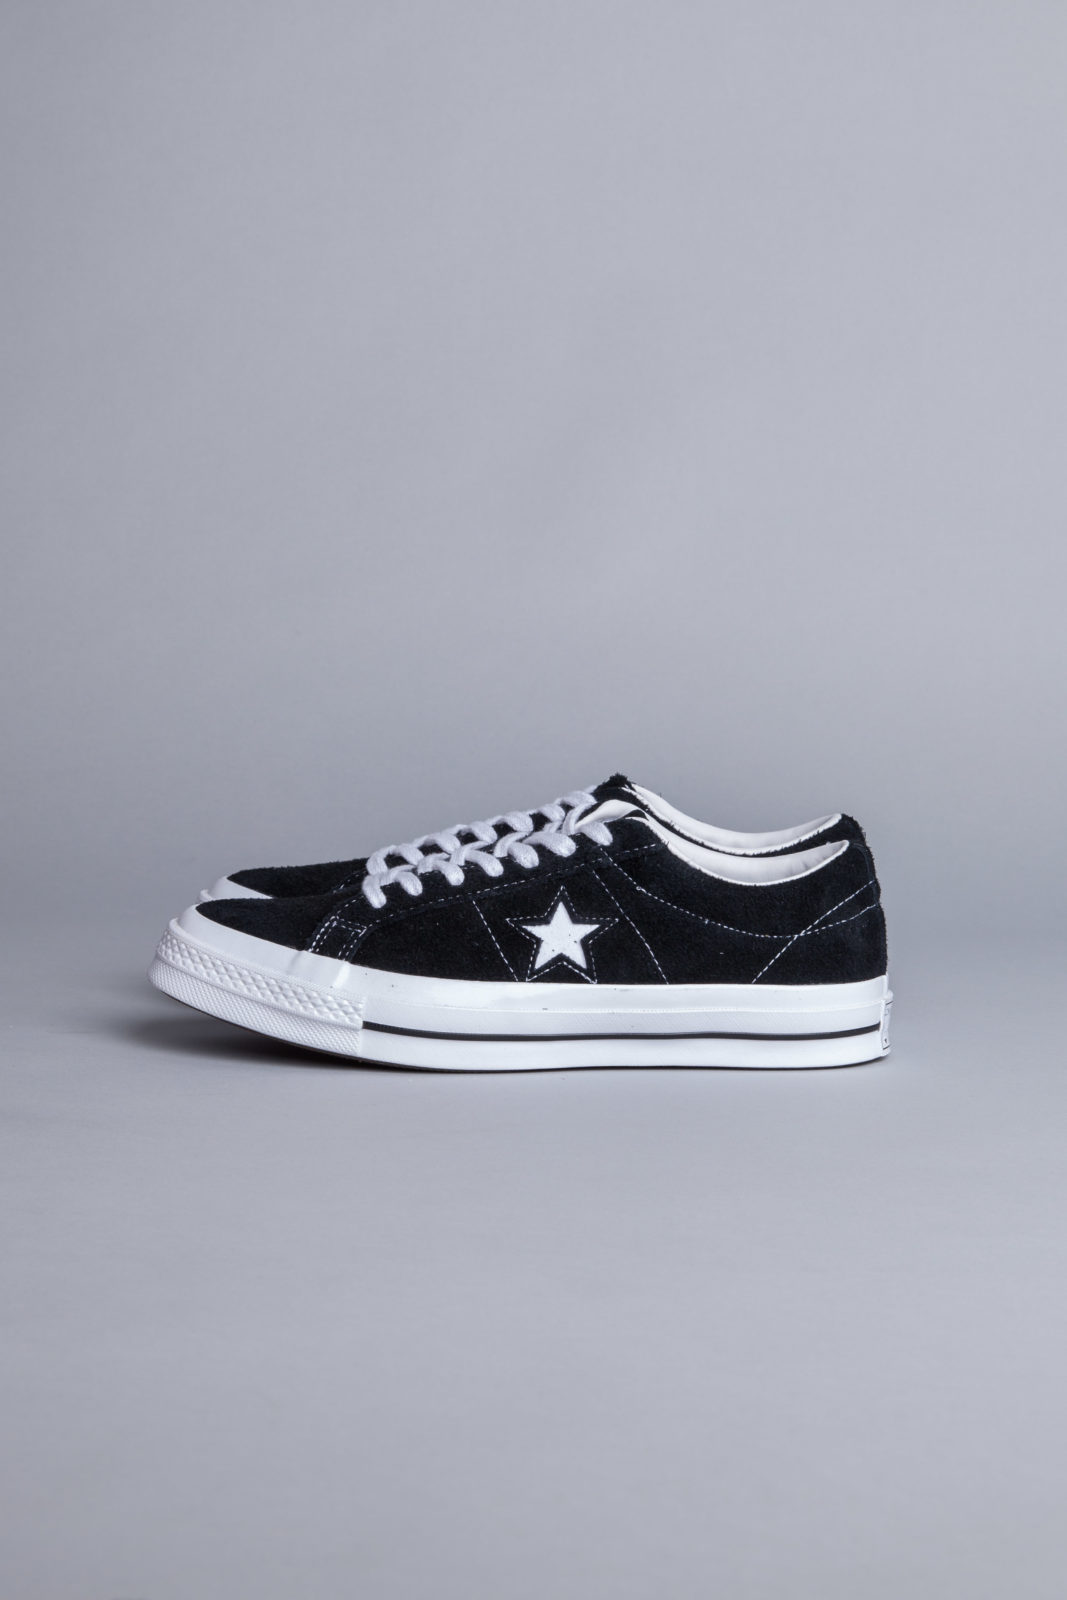 Converse One Star OX Black Sneakers • Centreville Store